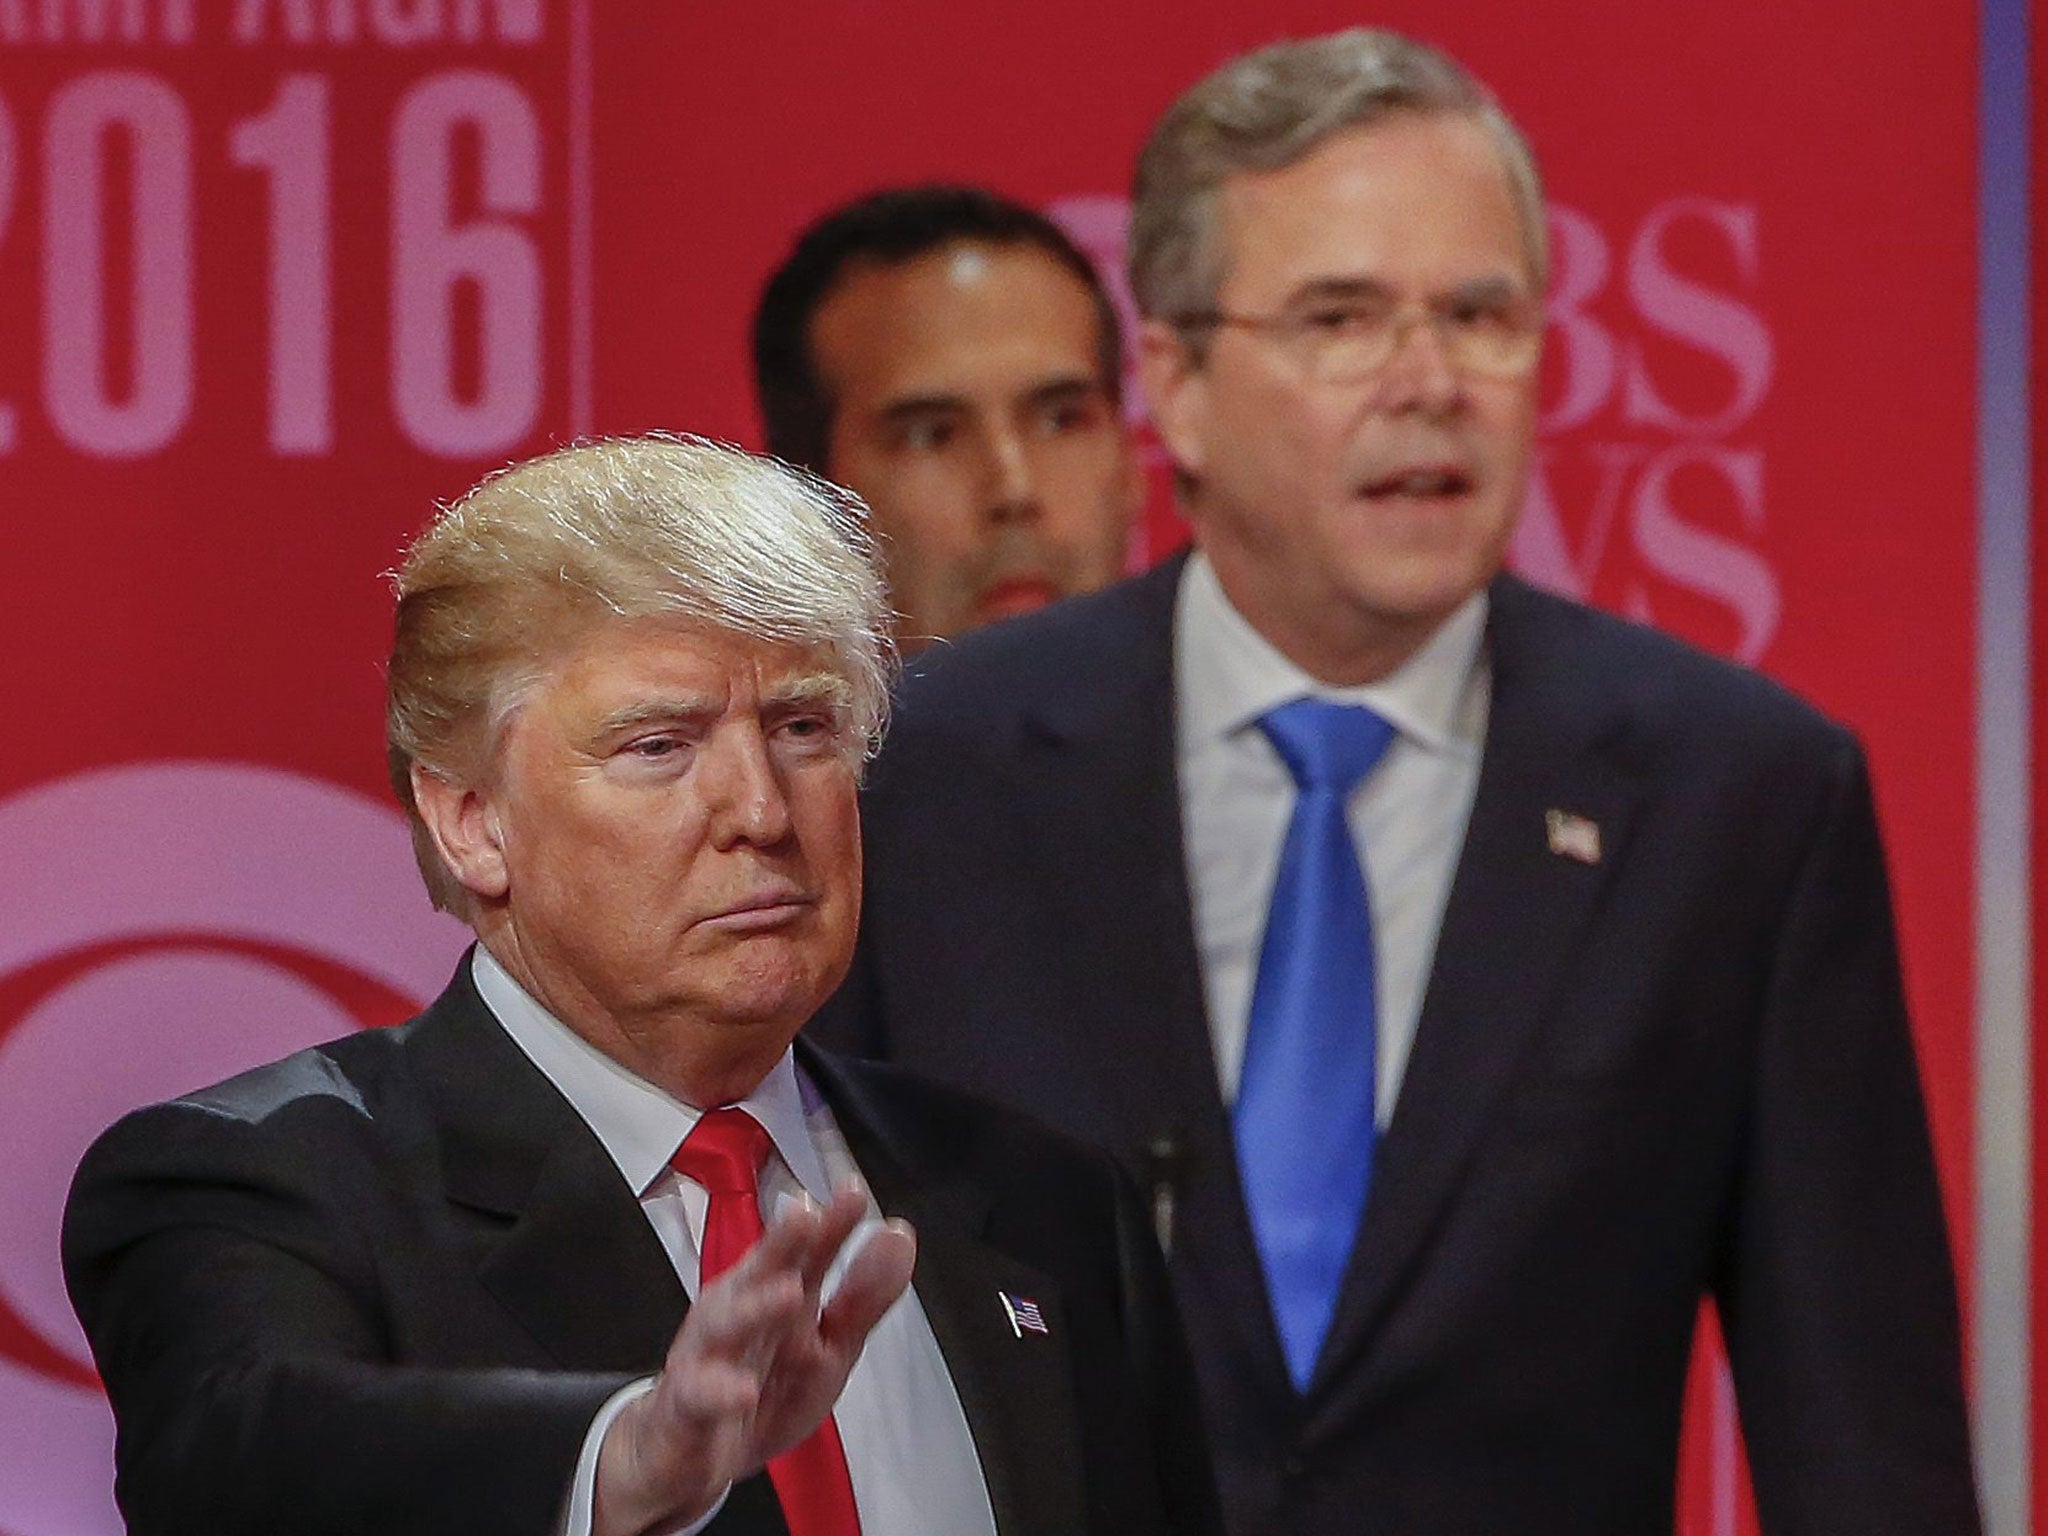 Donald Trump, left, and fellow candidate Jeb Bush speaking at the debate